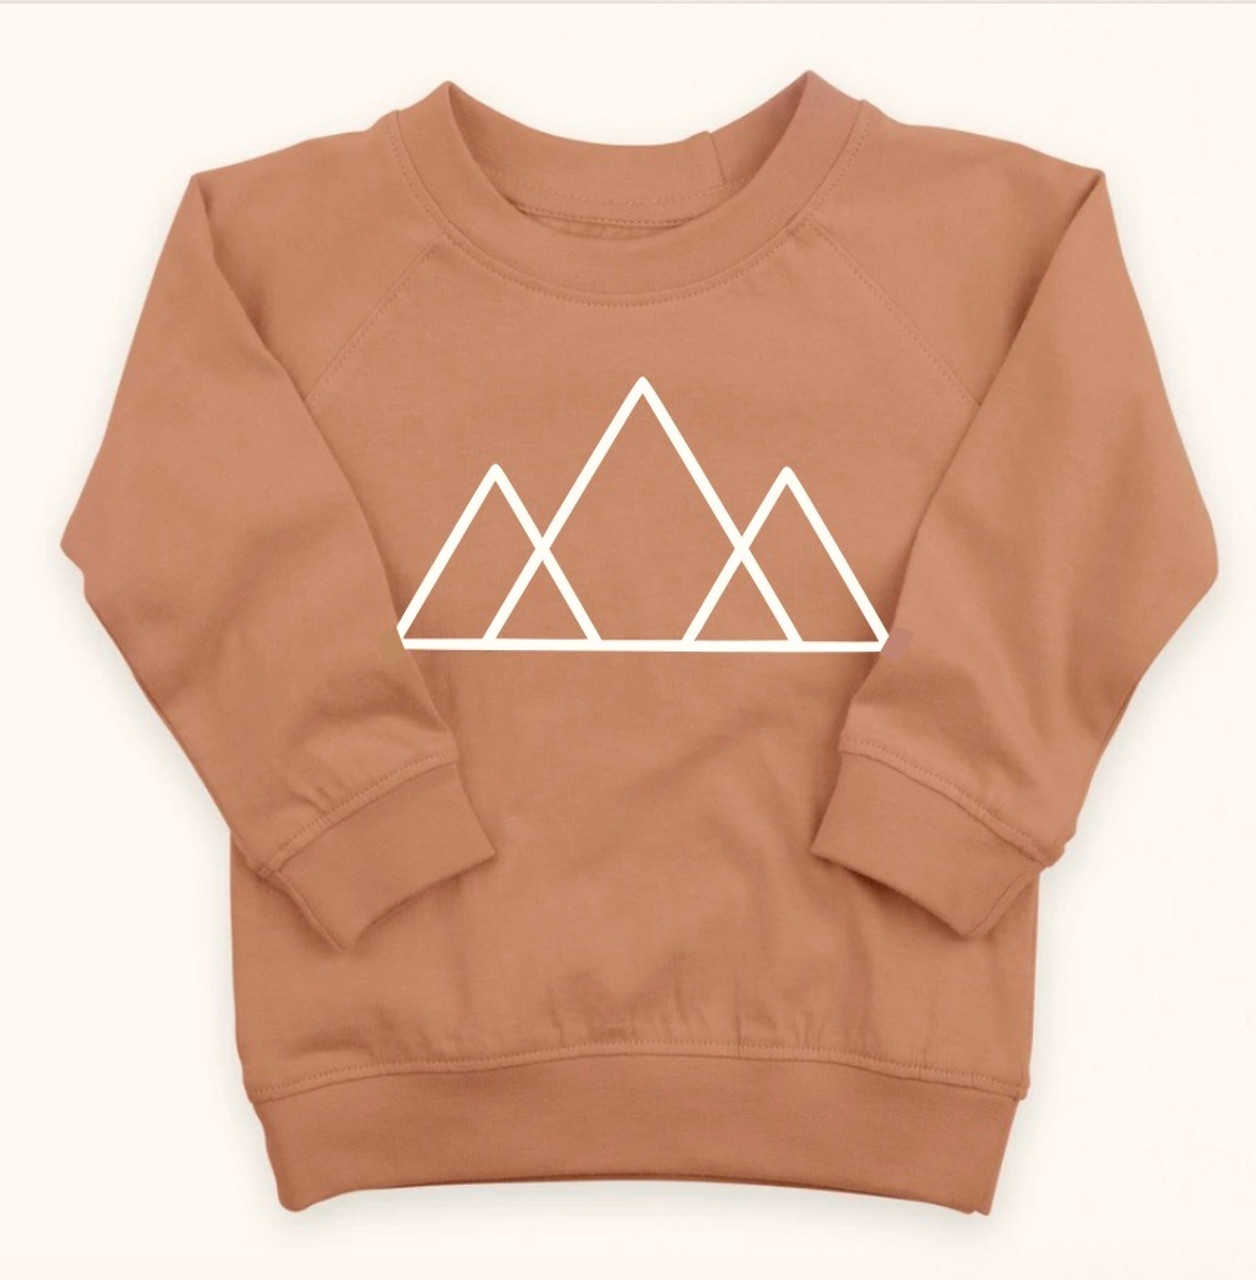 Triangle Mountains organic unisex baby and kids pullover